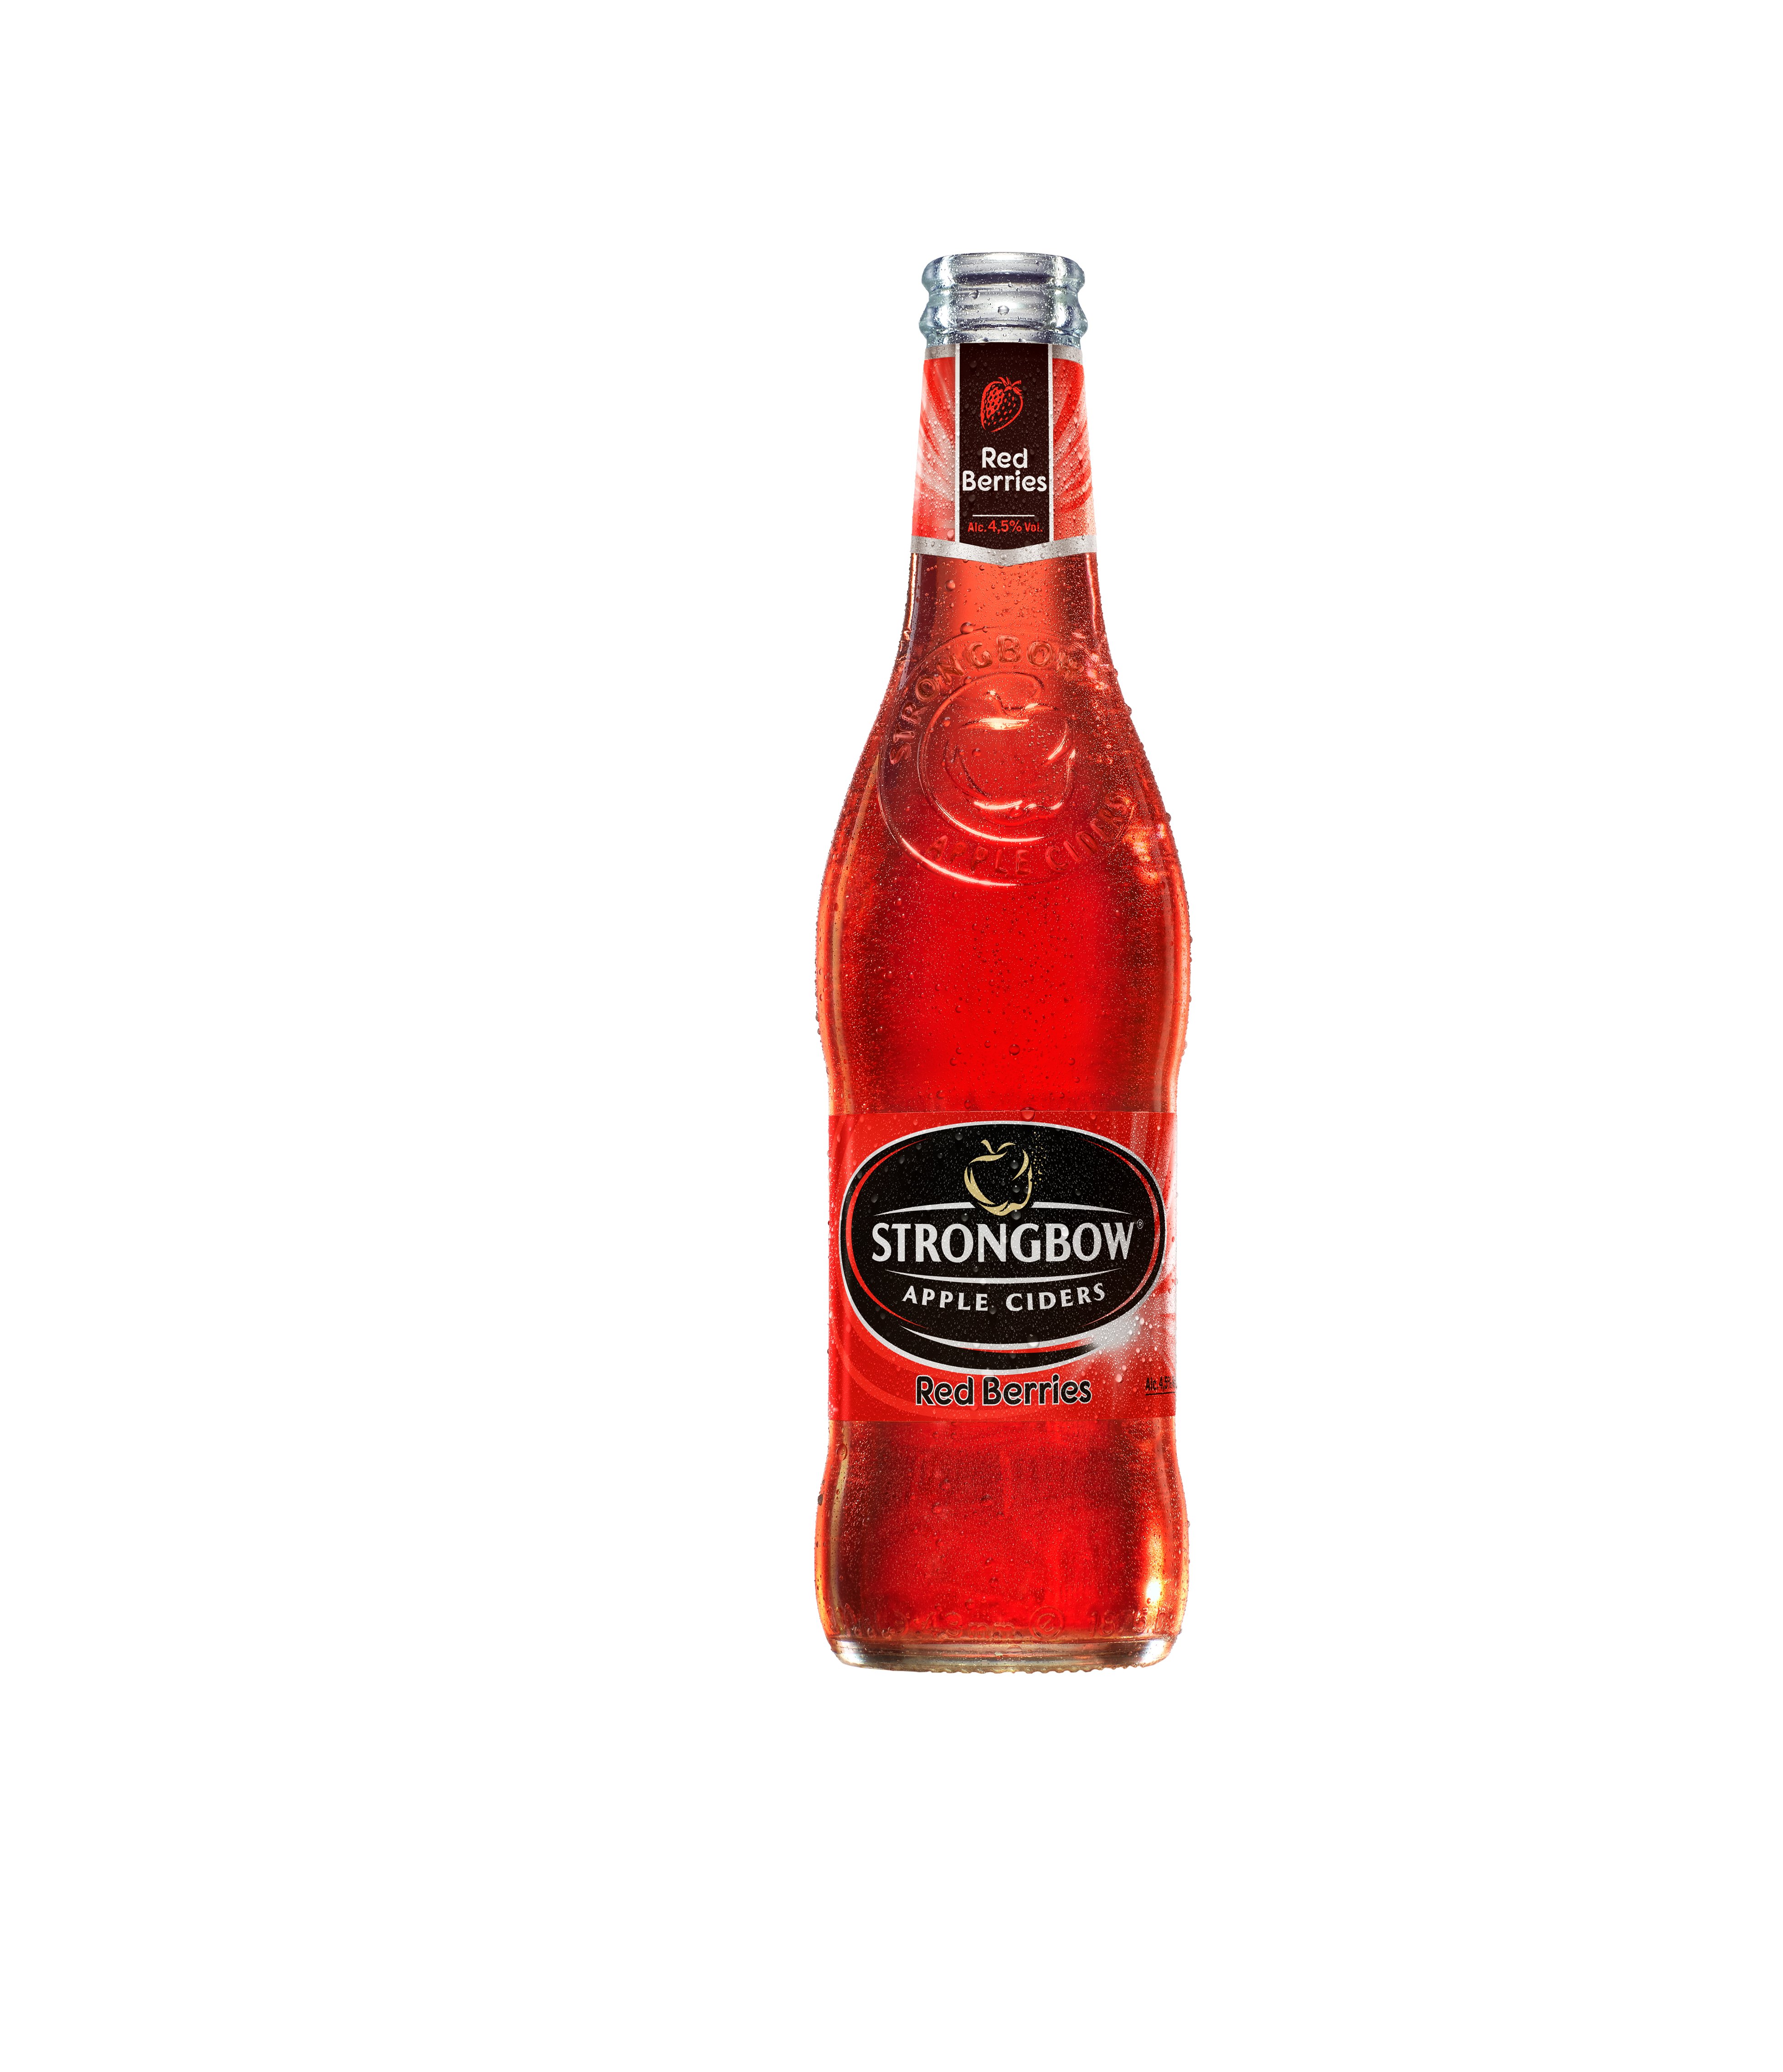 Strongbow Red Berries Bottle (Old Label) Hero Product Image 3914X4549px